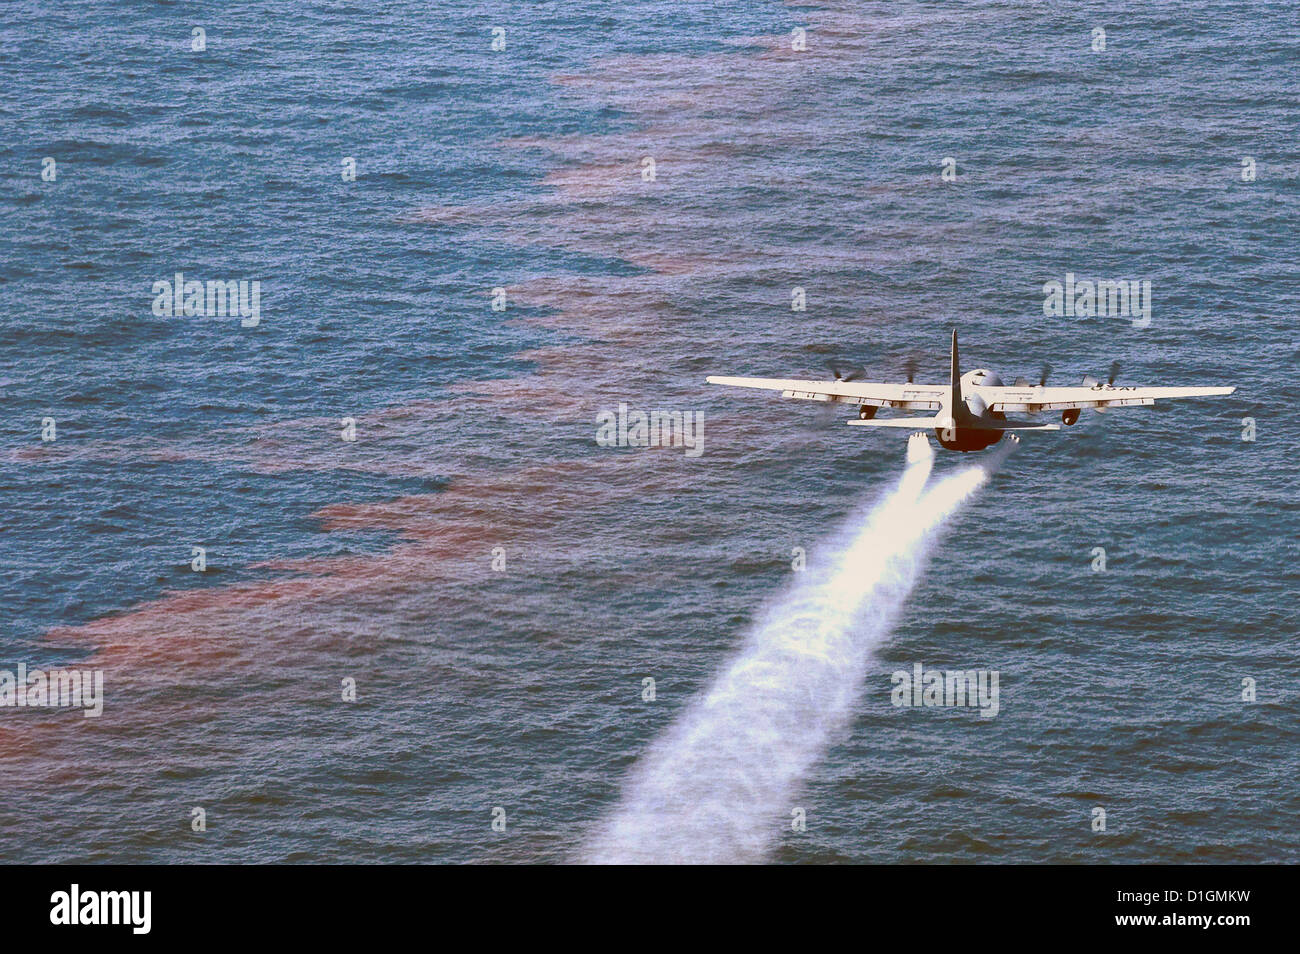 A US Air Force C-130 Hercules drops oil-dispersing chemicals over an oil slick as part of the Deepwater Horizon Response effort May 5, 2010 in the Gulf of Mexico. Stock Photo